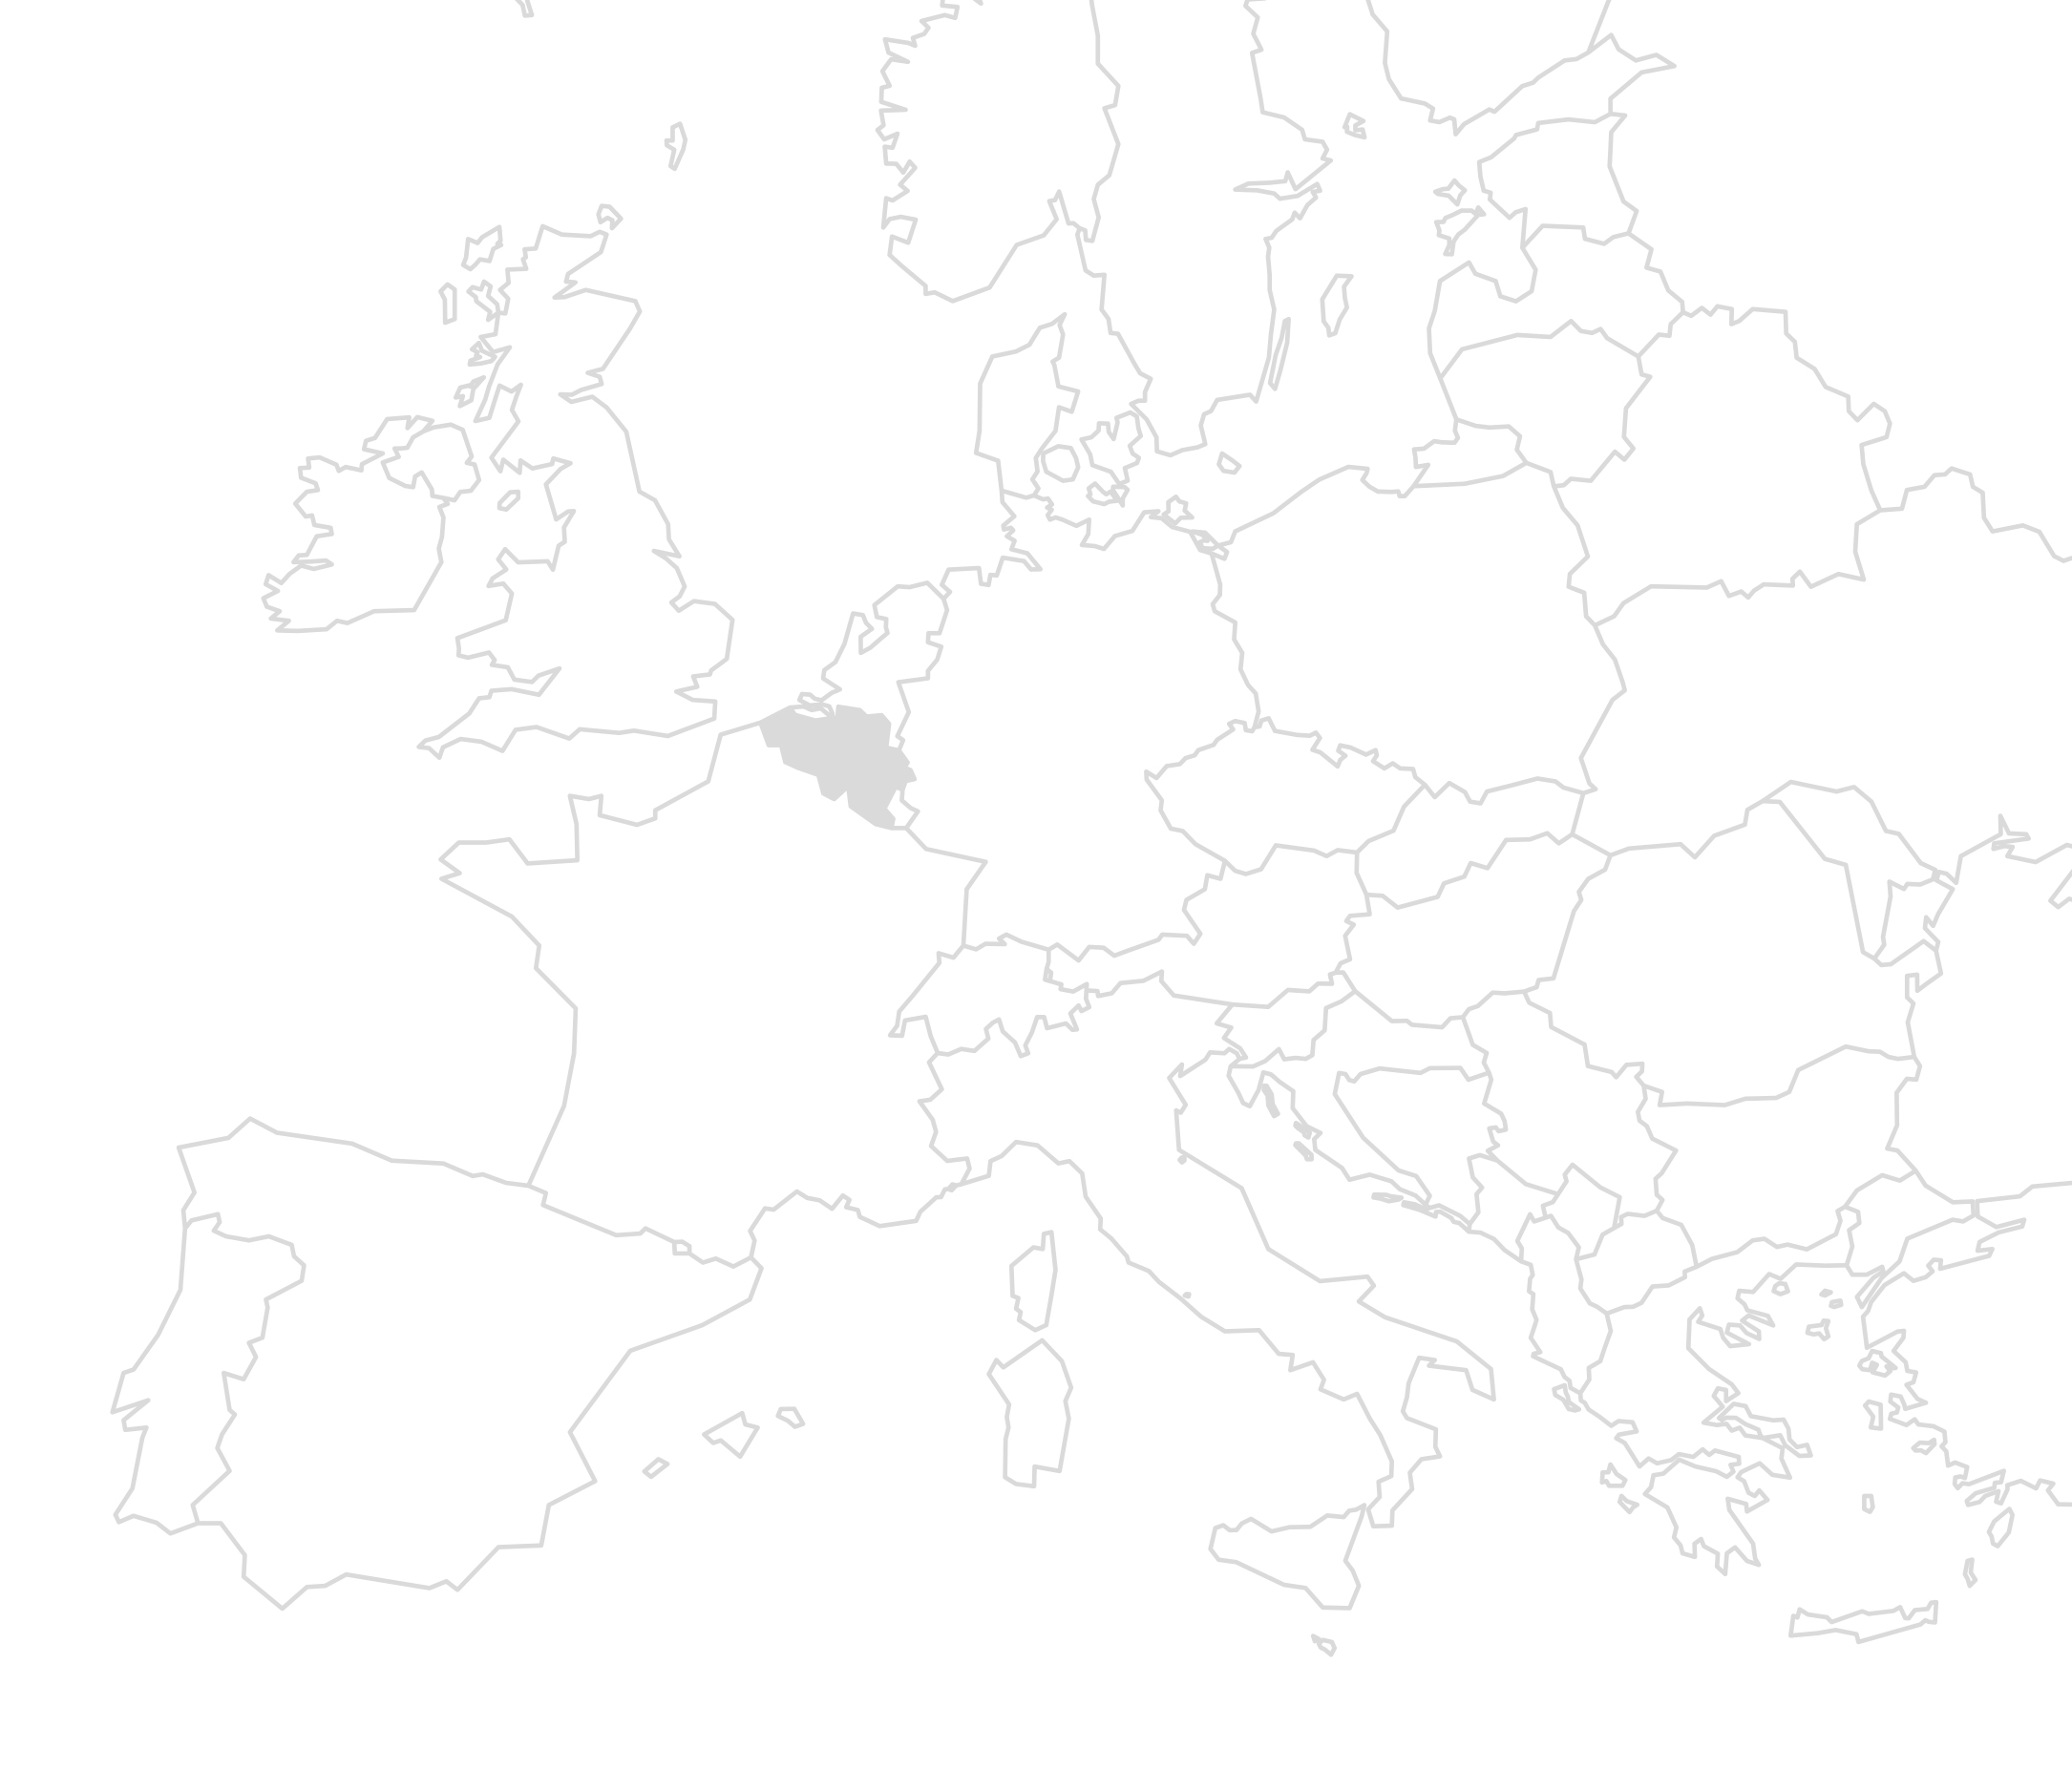 A map of Europe where Beglium is filled in gray to visualize the location of the construction project.